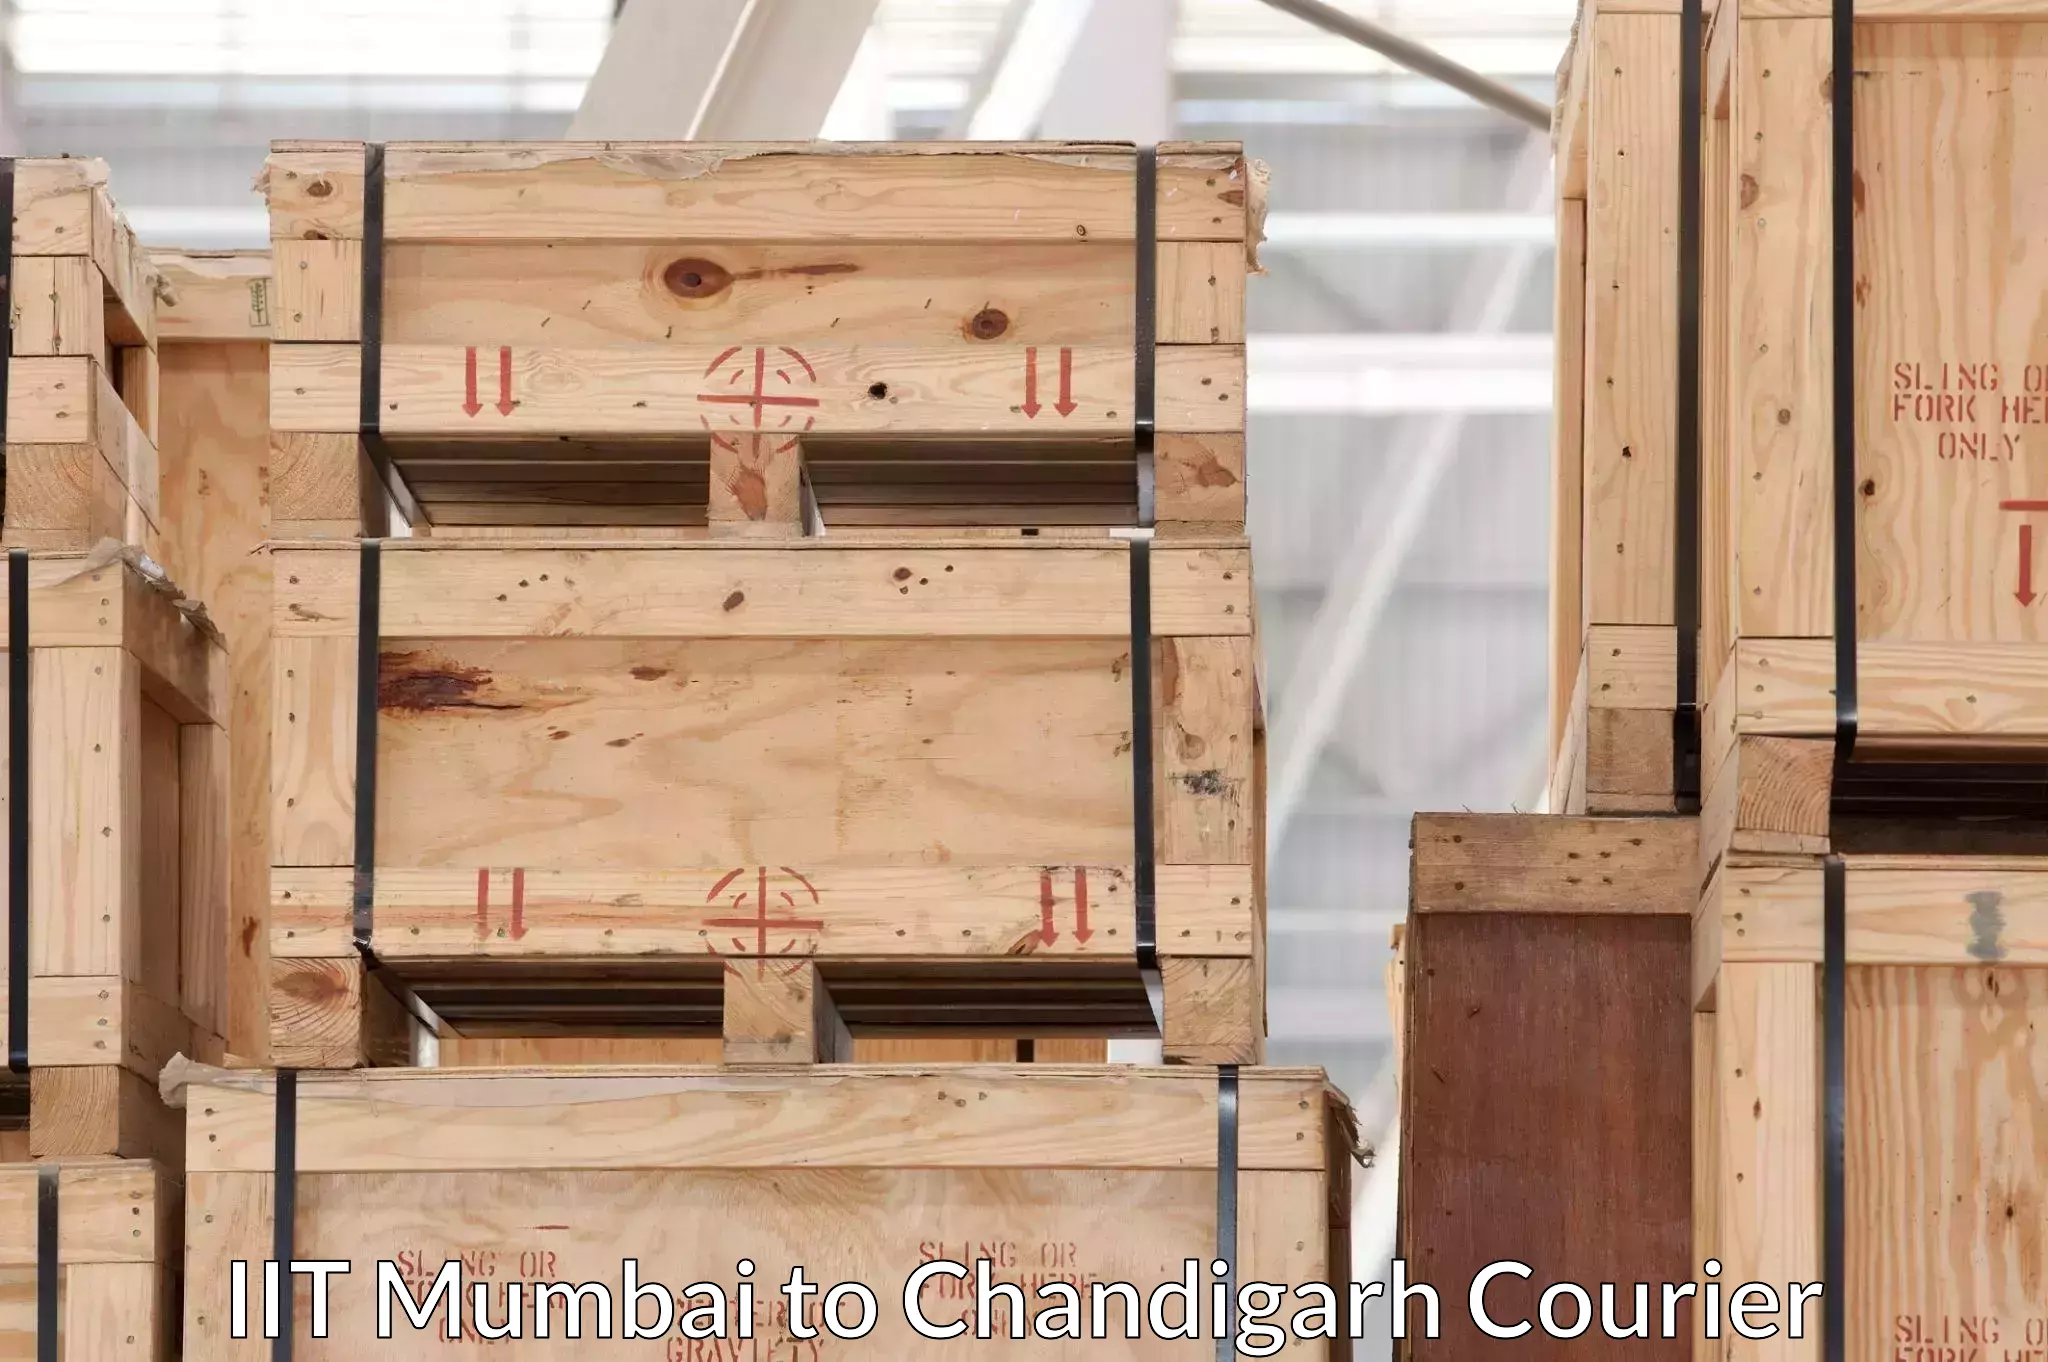 Furniture delivery service IIT Mumbai to Chandigarh